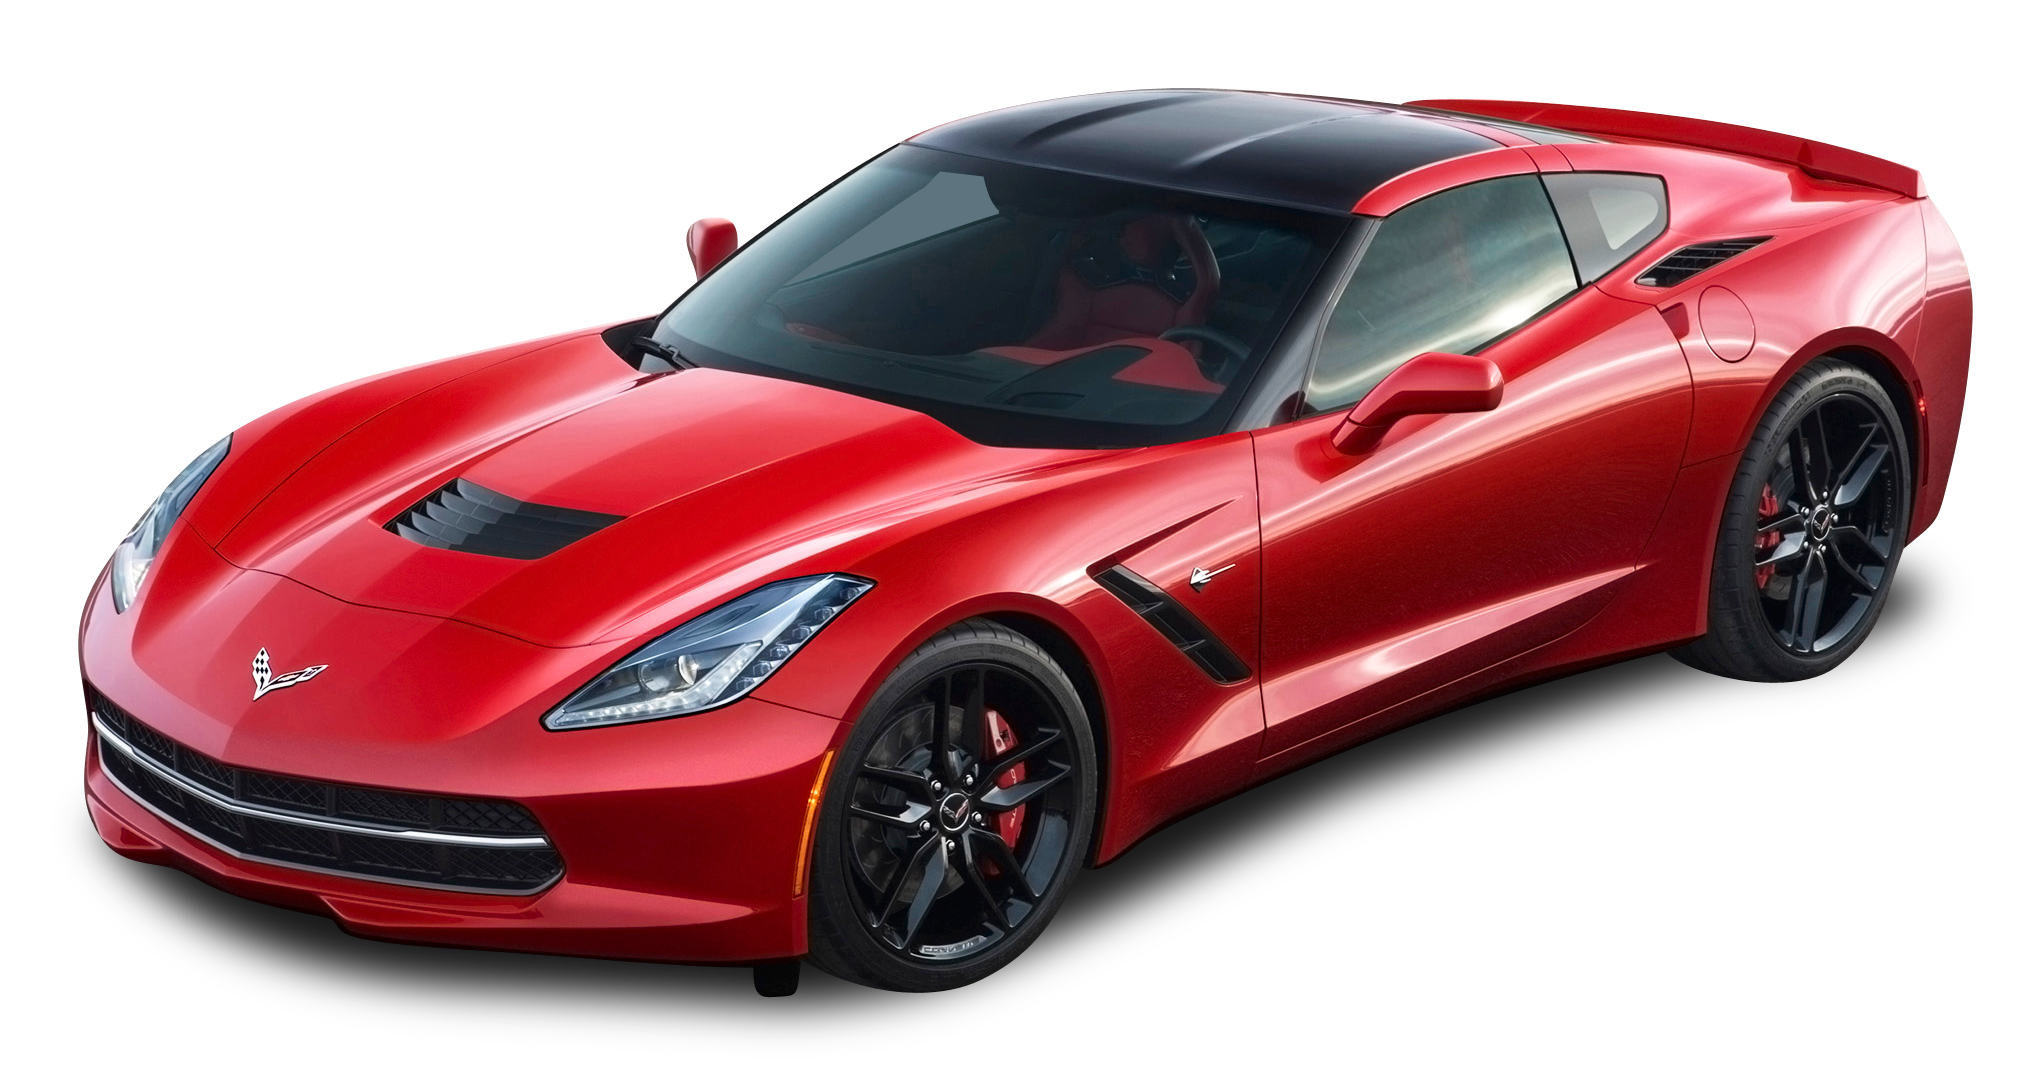 Red Chevrolet Corvette Stingray Top View Car PNG Image PurePNG Free